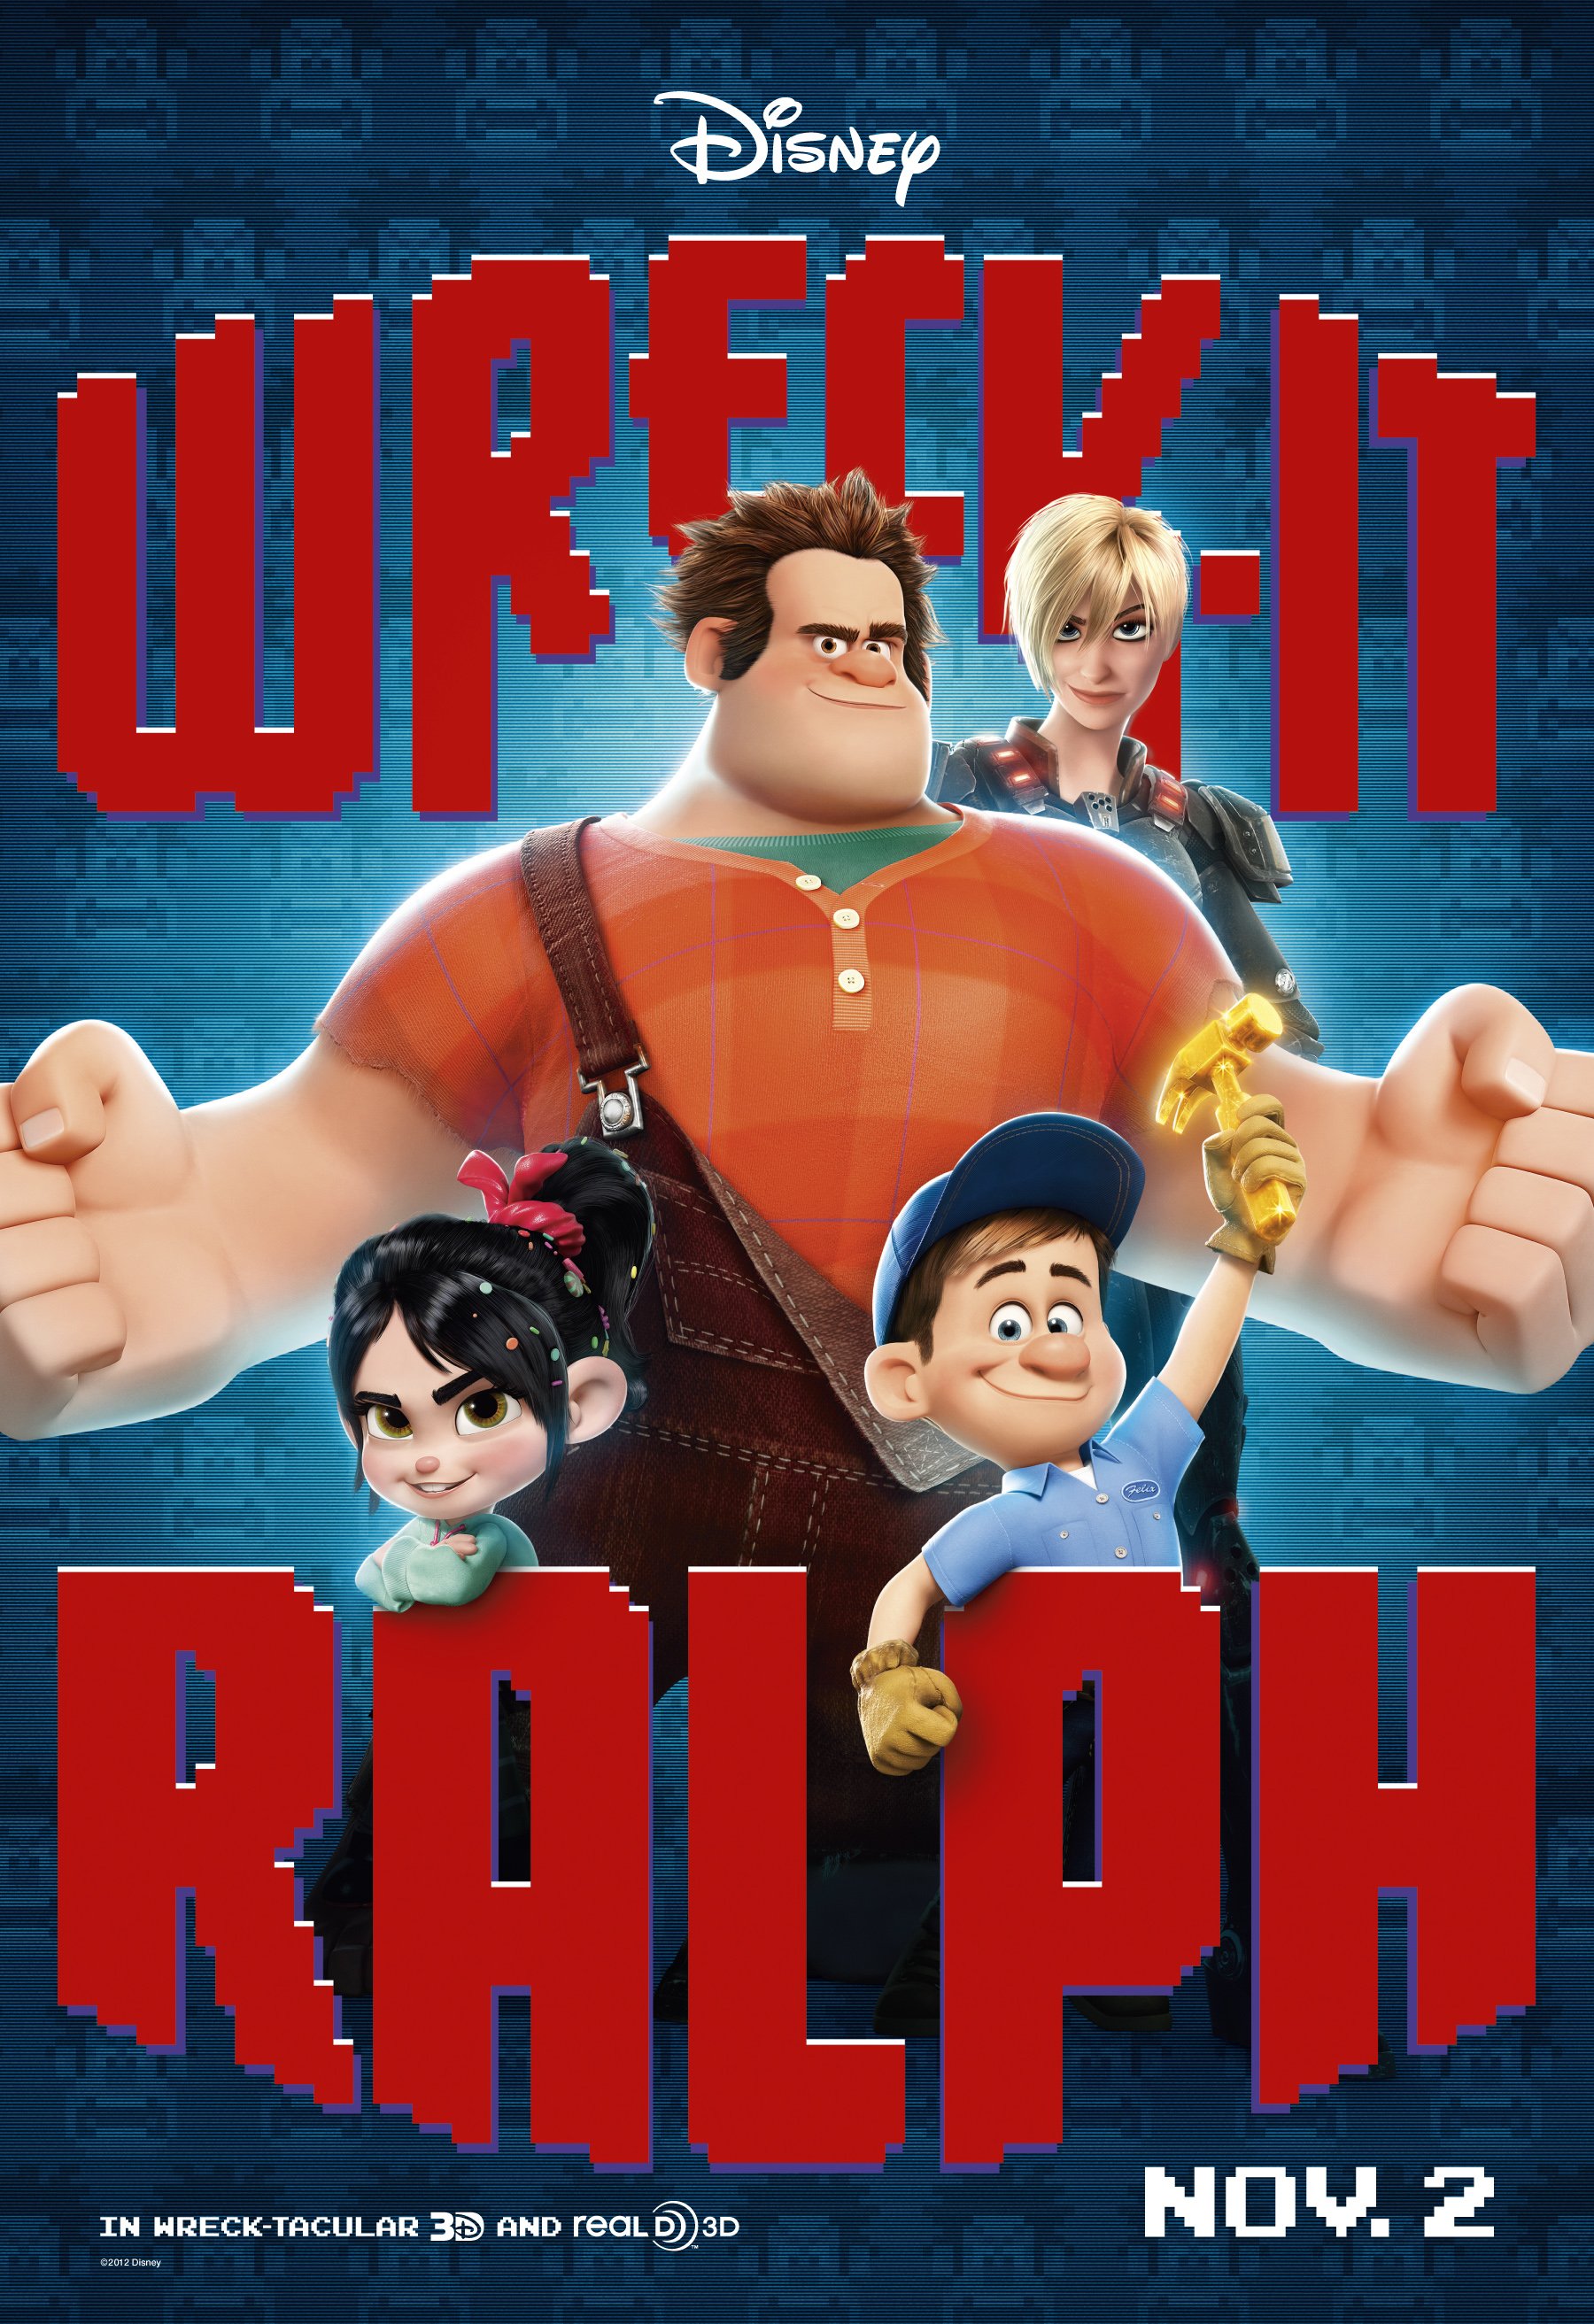 Poster of the movie Wreck-It Ralph